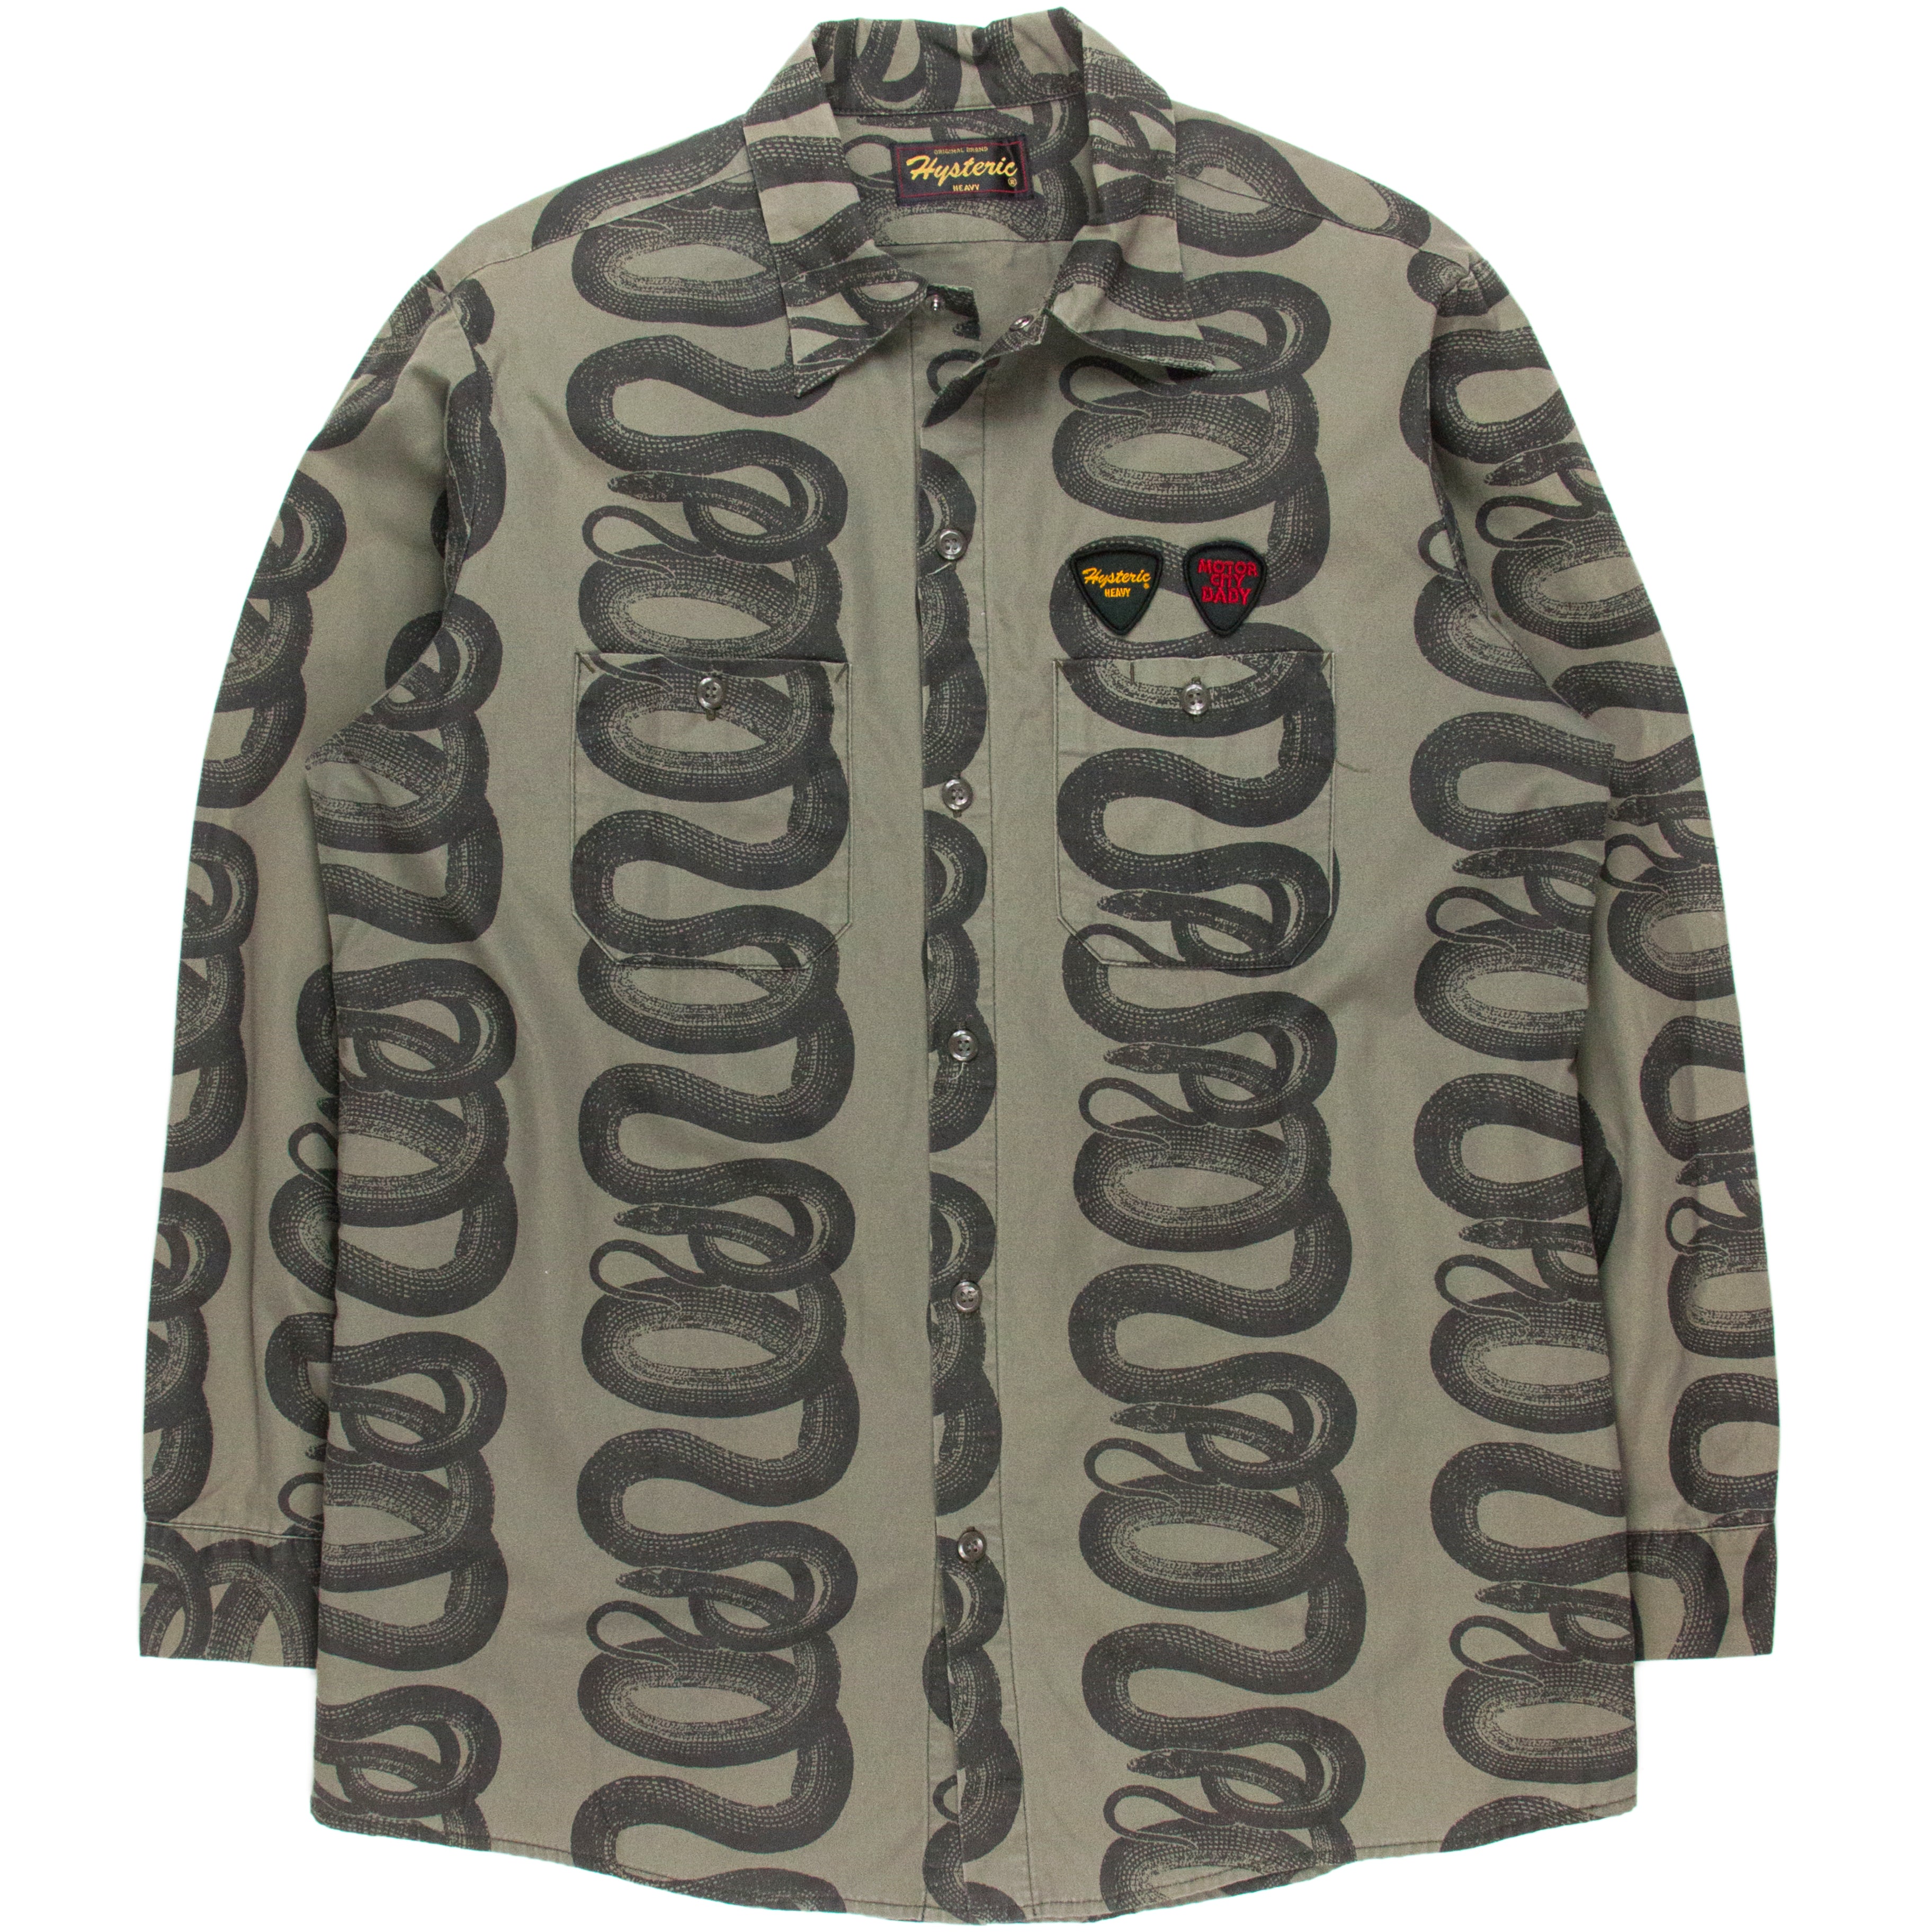 Hysteric Glamour Snake Shirt